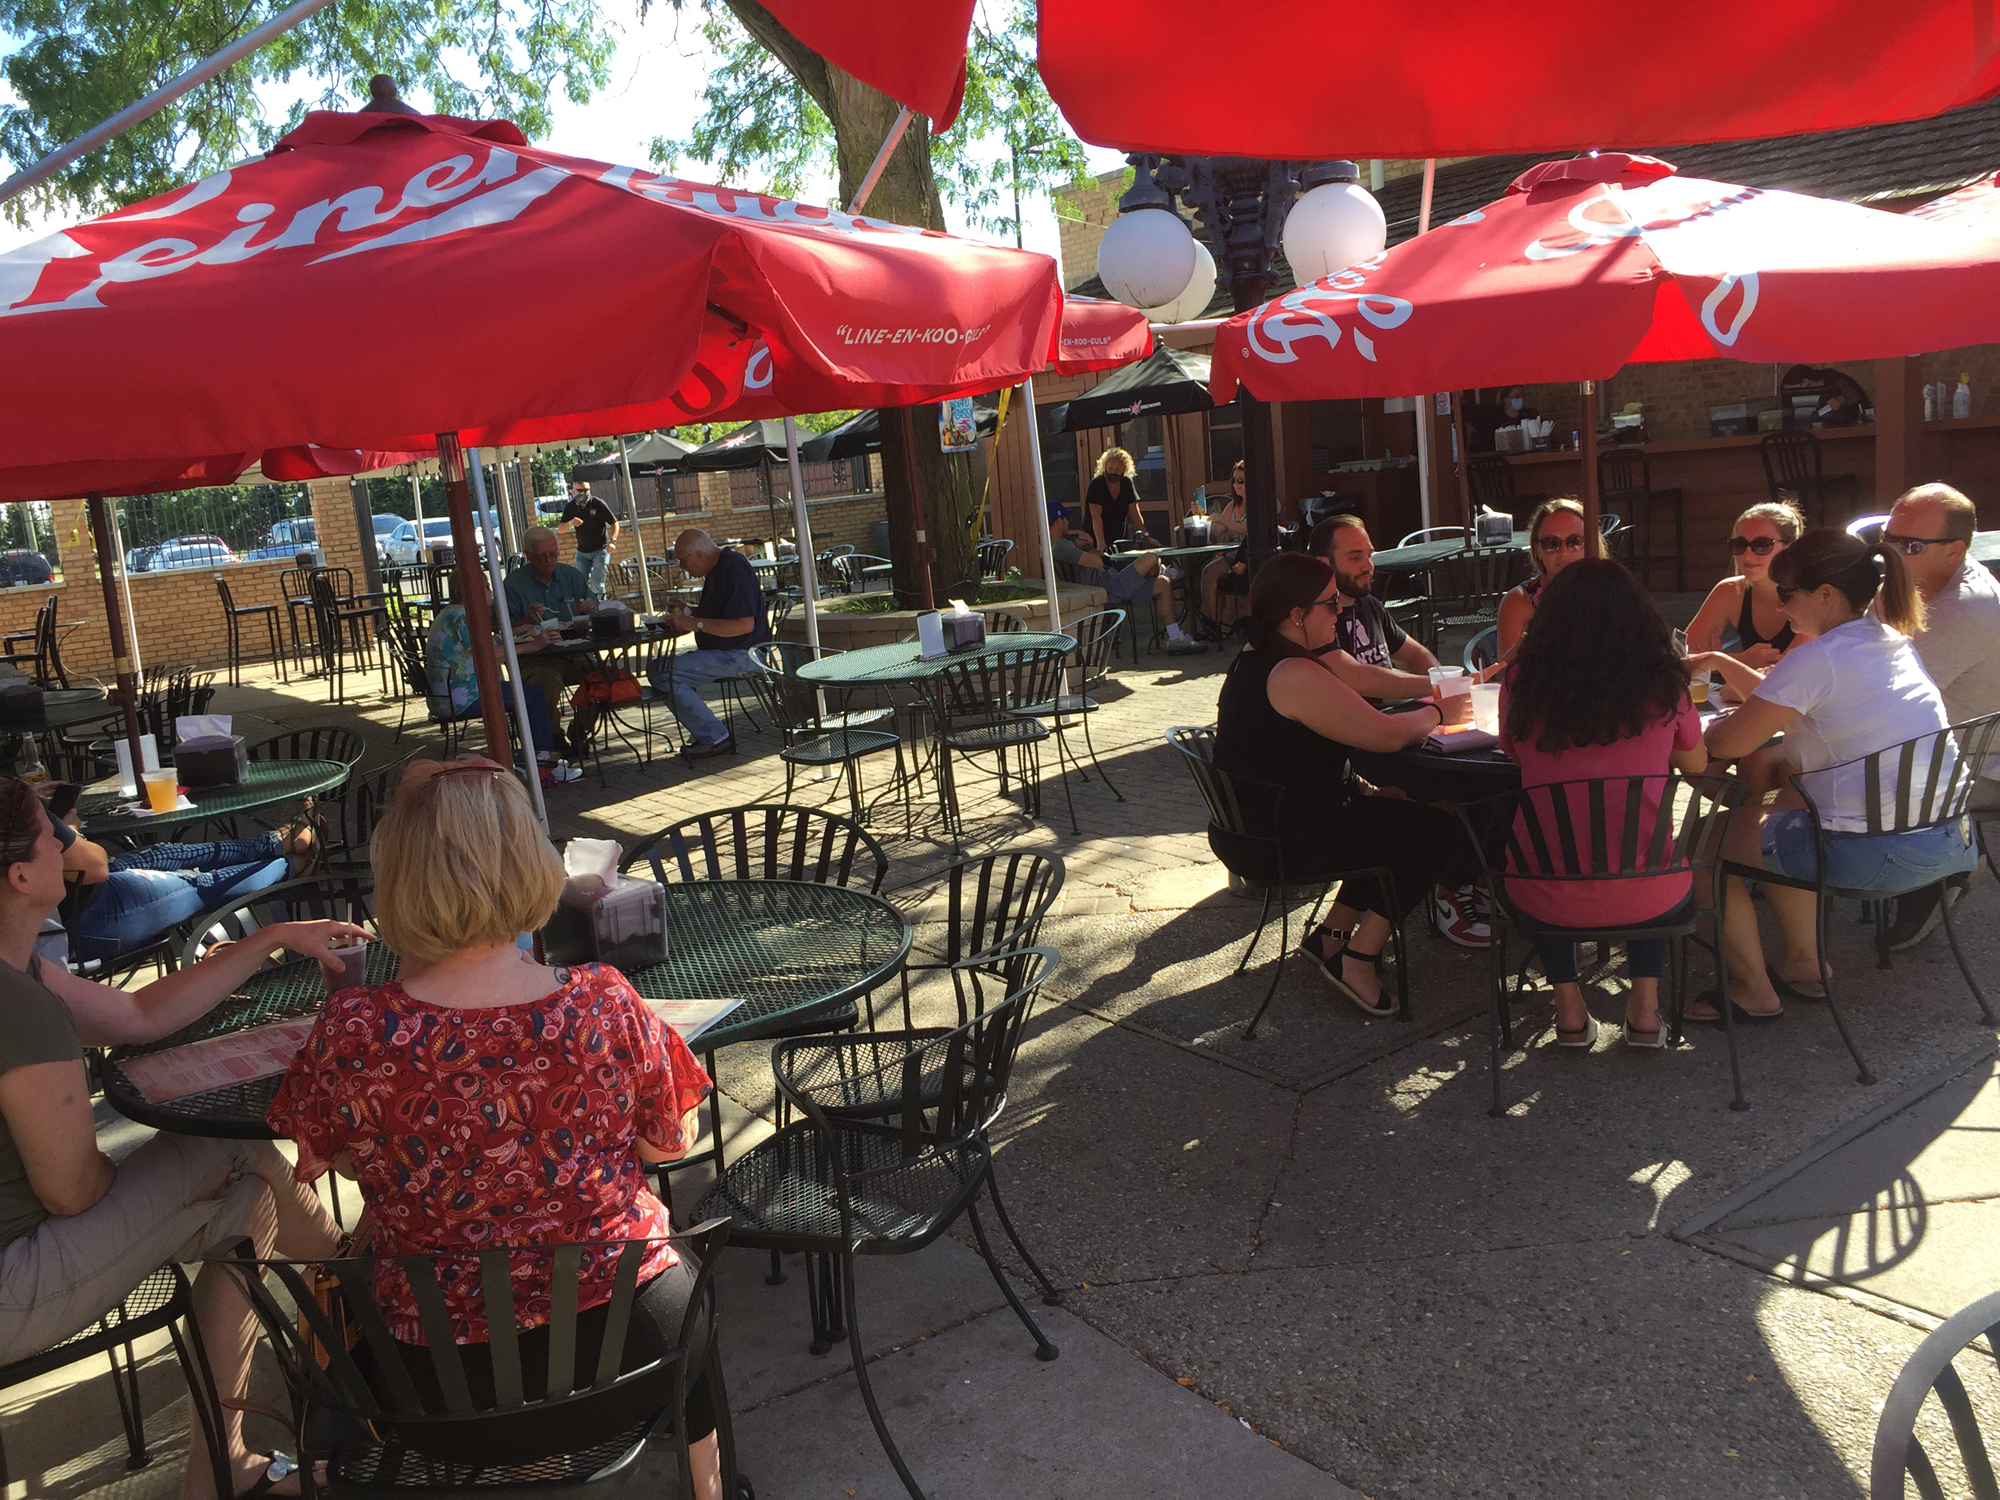 Business on the already-established patio at Parkside Pub is steady and busy with diners making up about 80% of the restaurant’s receipts, about four times the business done indoors. Whether the state regulations will allow the restaurant to use its tent and heaters on the patio this winter remains to be determined.